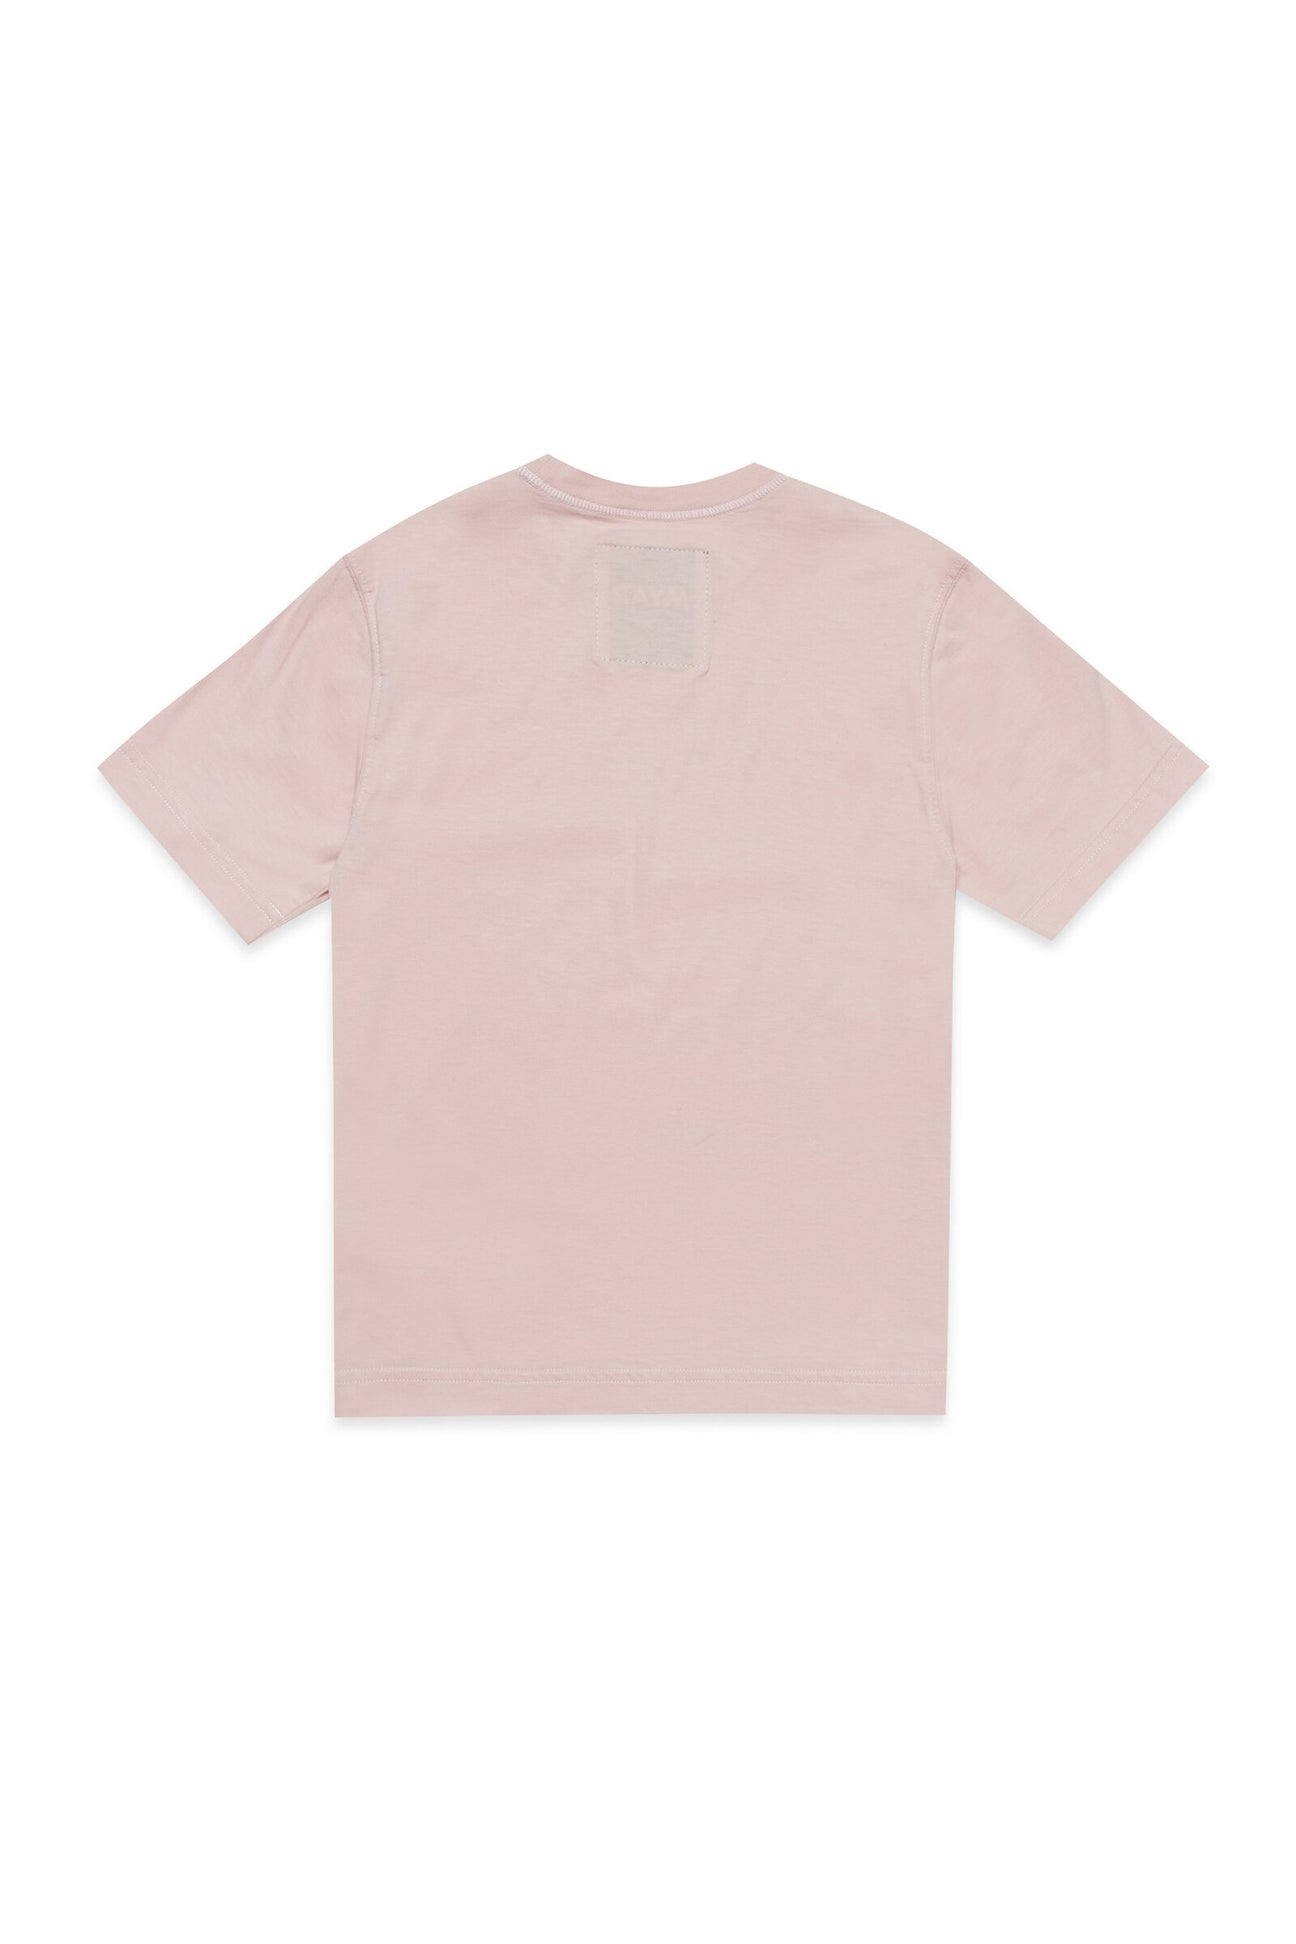 Deadstock pink fabric crew-neck T-shirt with digital print Sloowly Deadstock pink fabric crew-neck T-shirt with digital print Sloowly